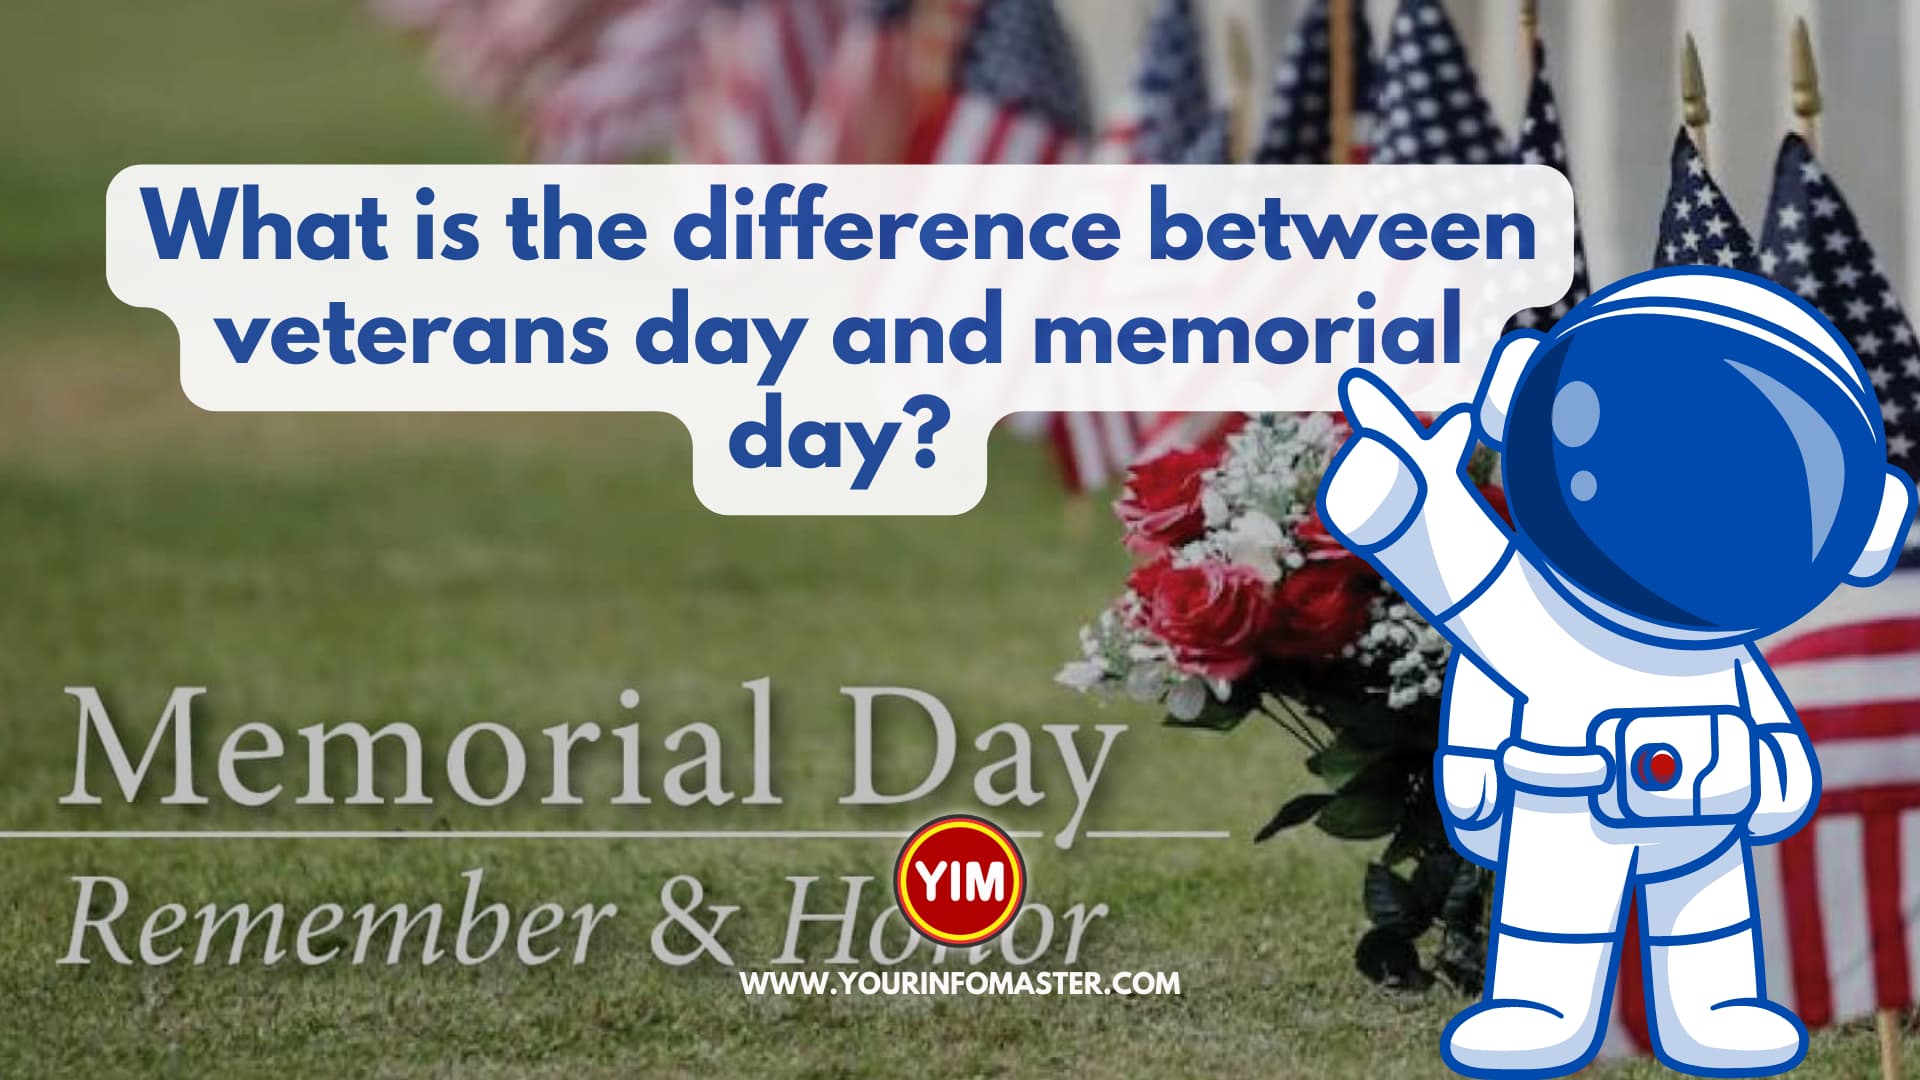 What is the difference between veterans day and memorial day